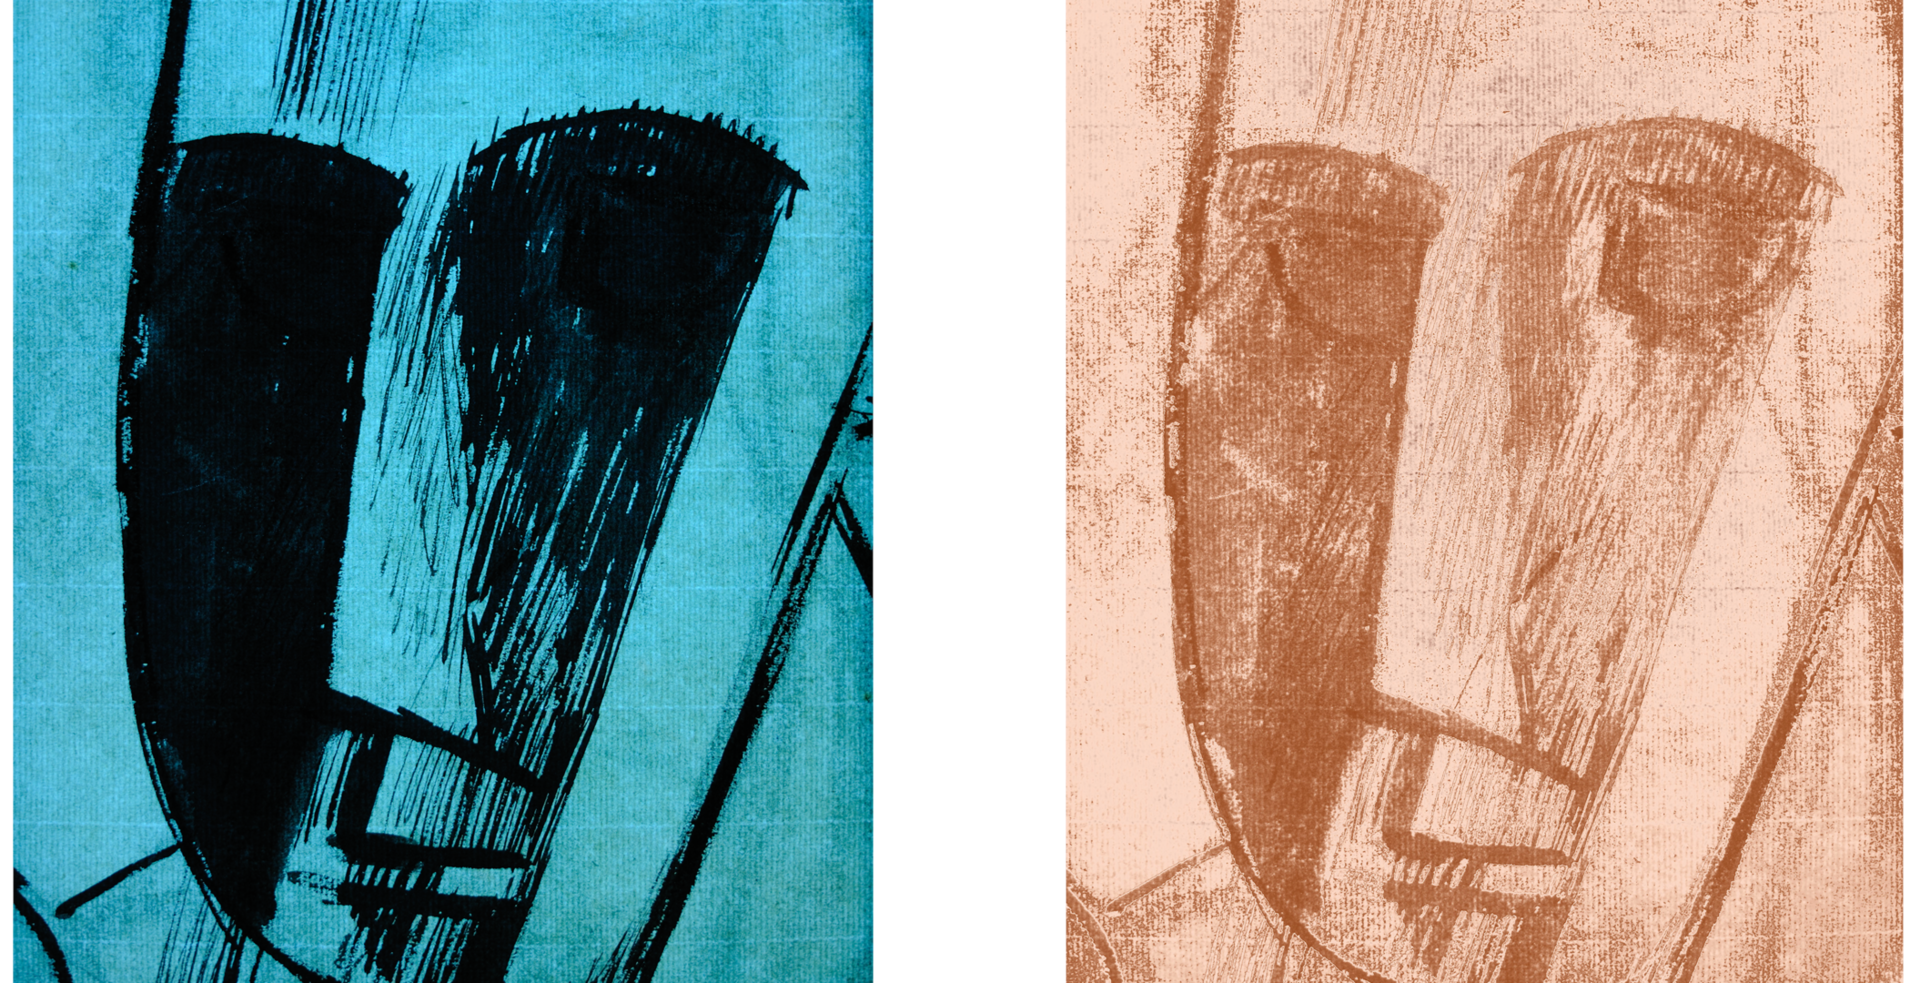 (Left) Head of a Man tinted in blue transmitted light showing more of the artist’s linework (Right) Head of a Man tinted in orange with visibly open eyes